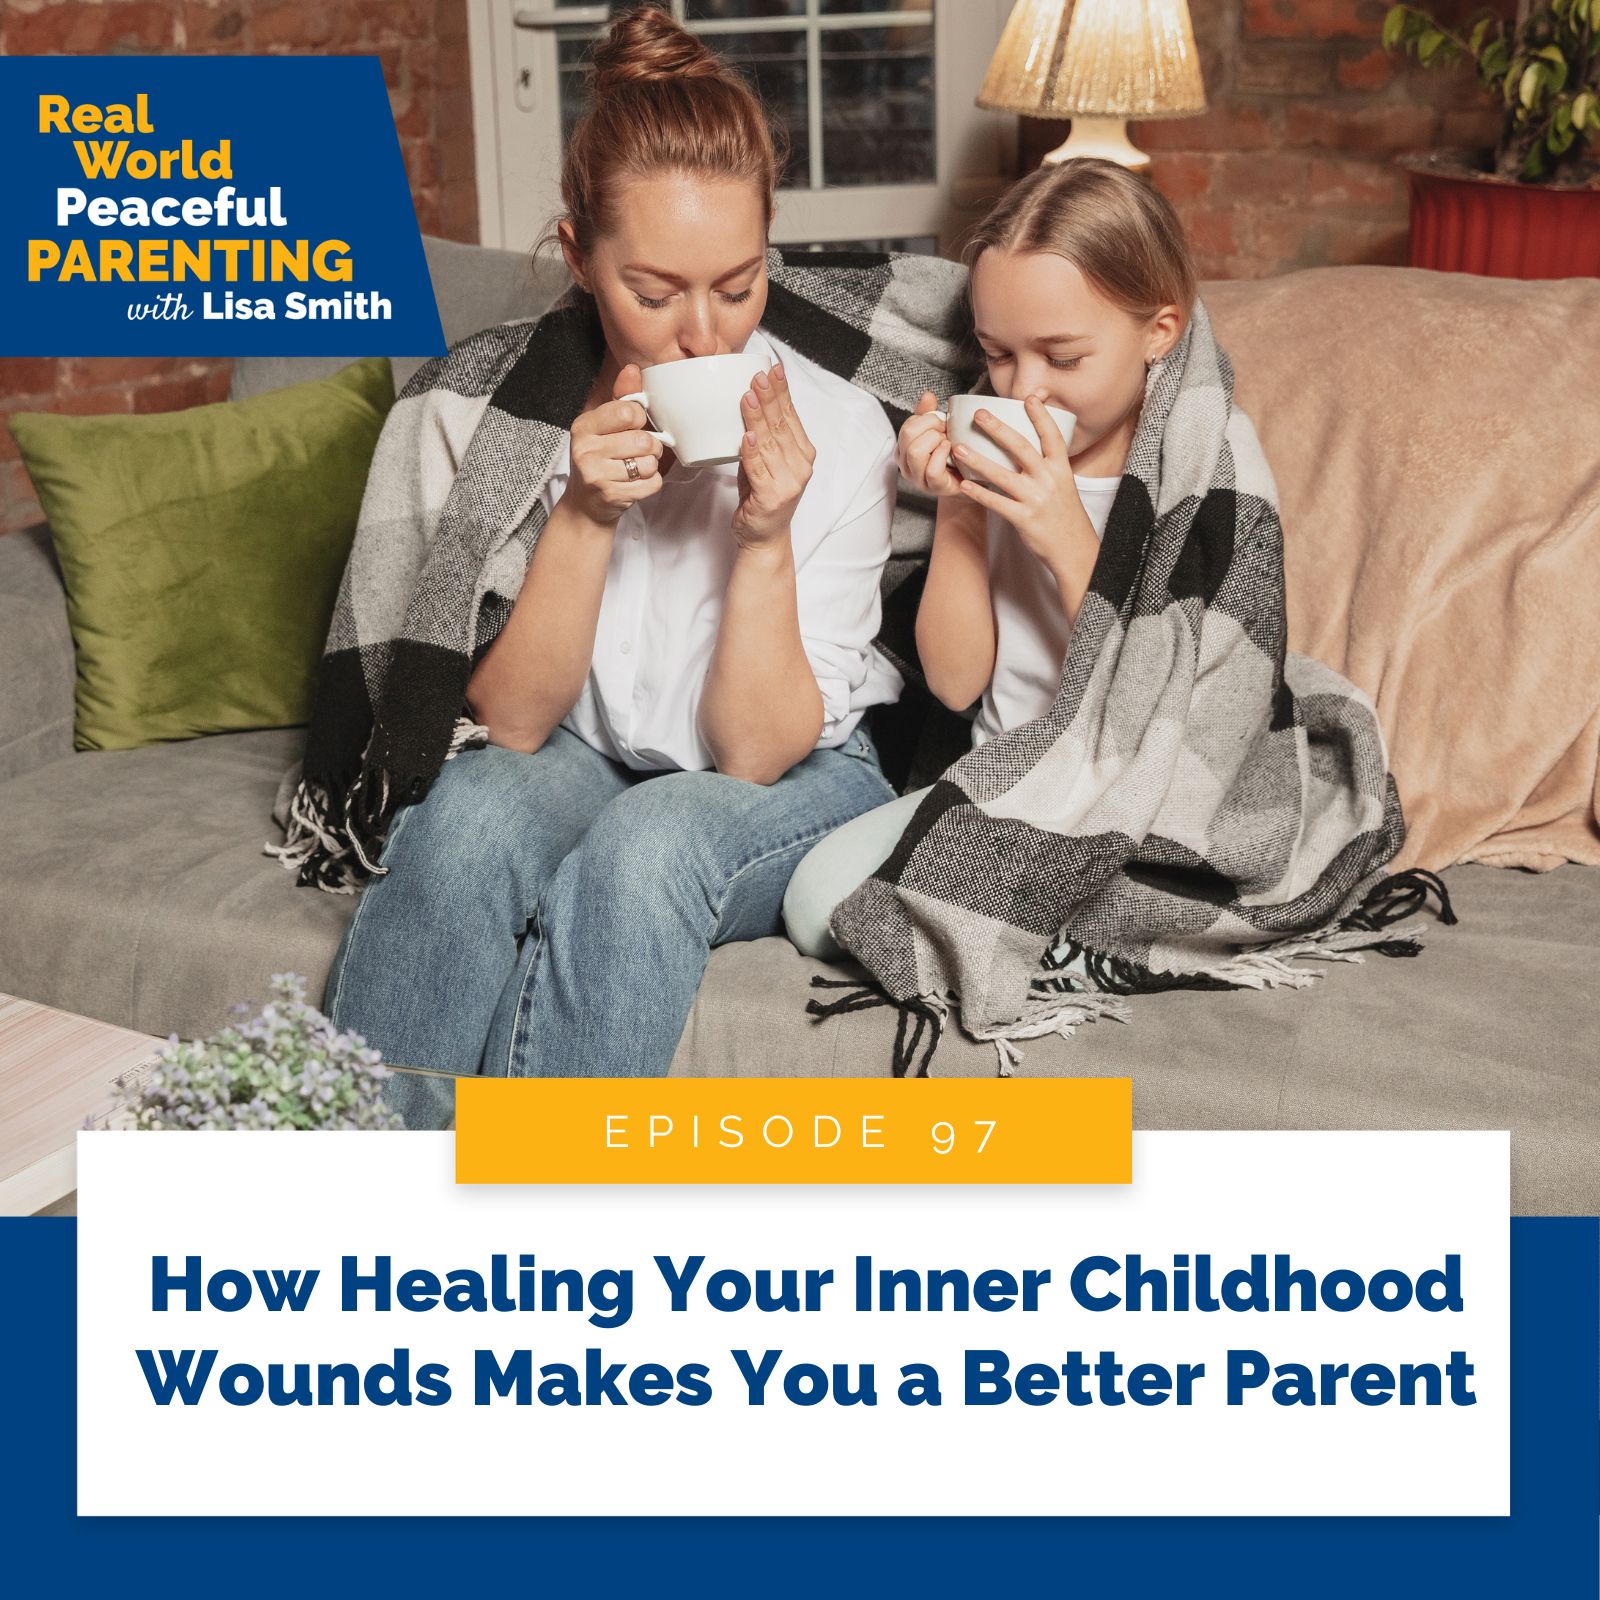 Real World Peaceful Parenting with Lisa Smith | How Healing Your Inner Childhood Wounds Makes You a Better Parent